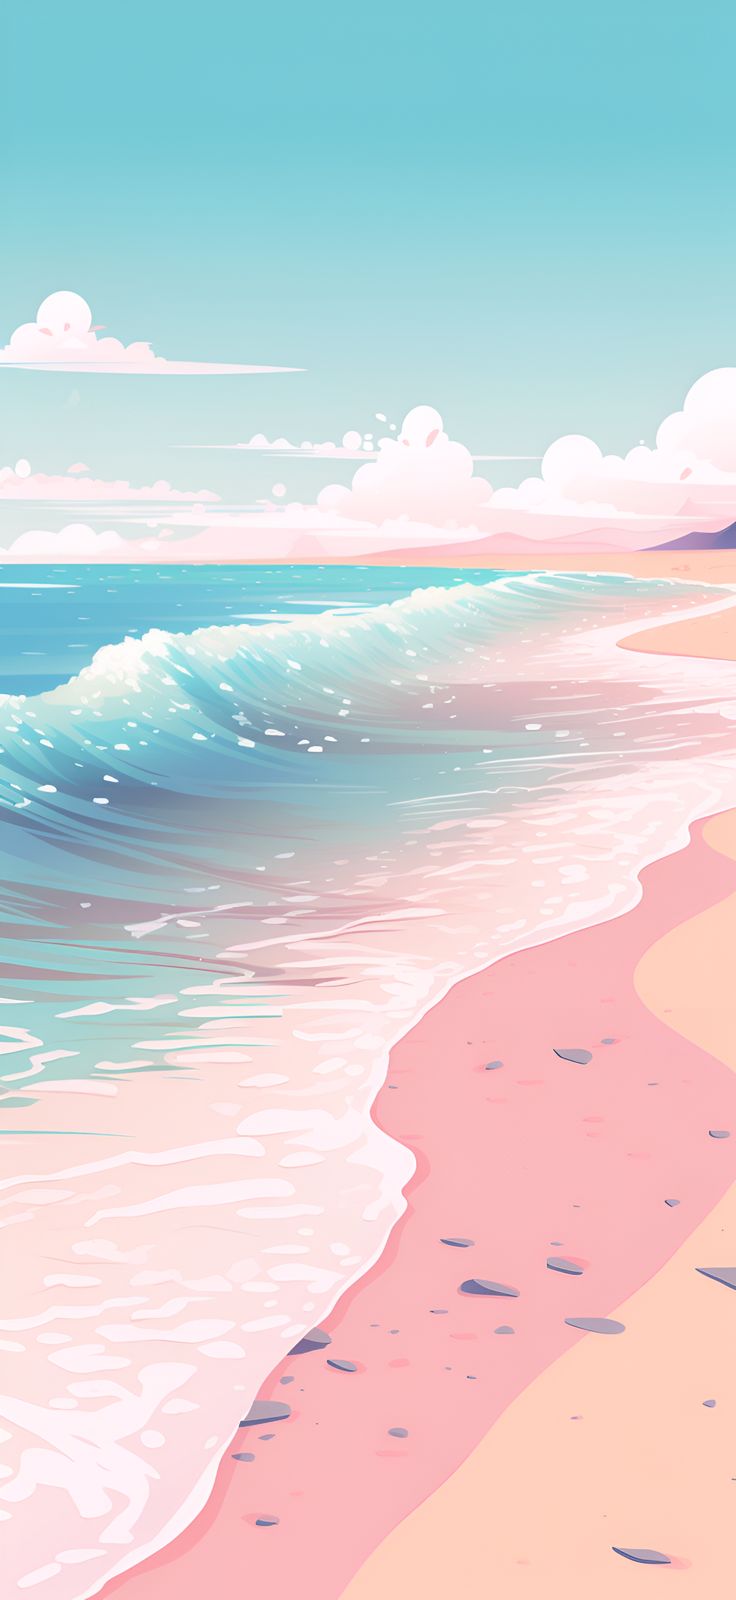 Aesthetic Wallpaper iPhone and Android Optimized: Heavenly Pink and Blue Beach Haven. Cute tumblr wallpaper, Scenery wallpaper, HD nature wallpaper